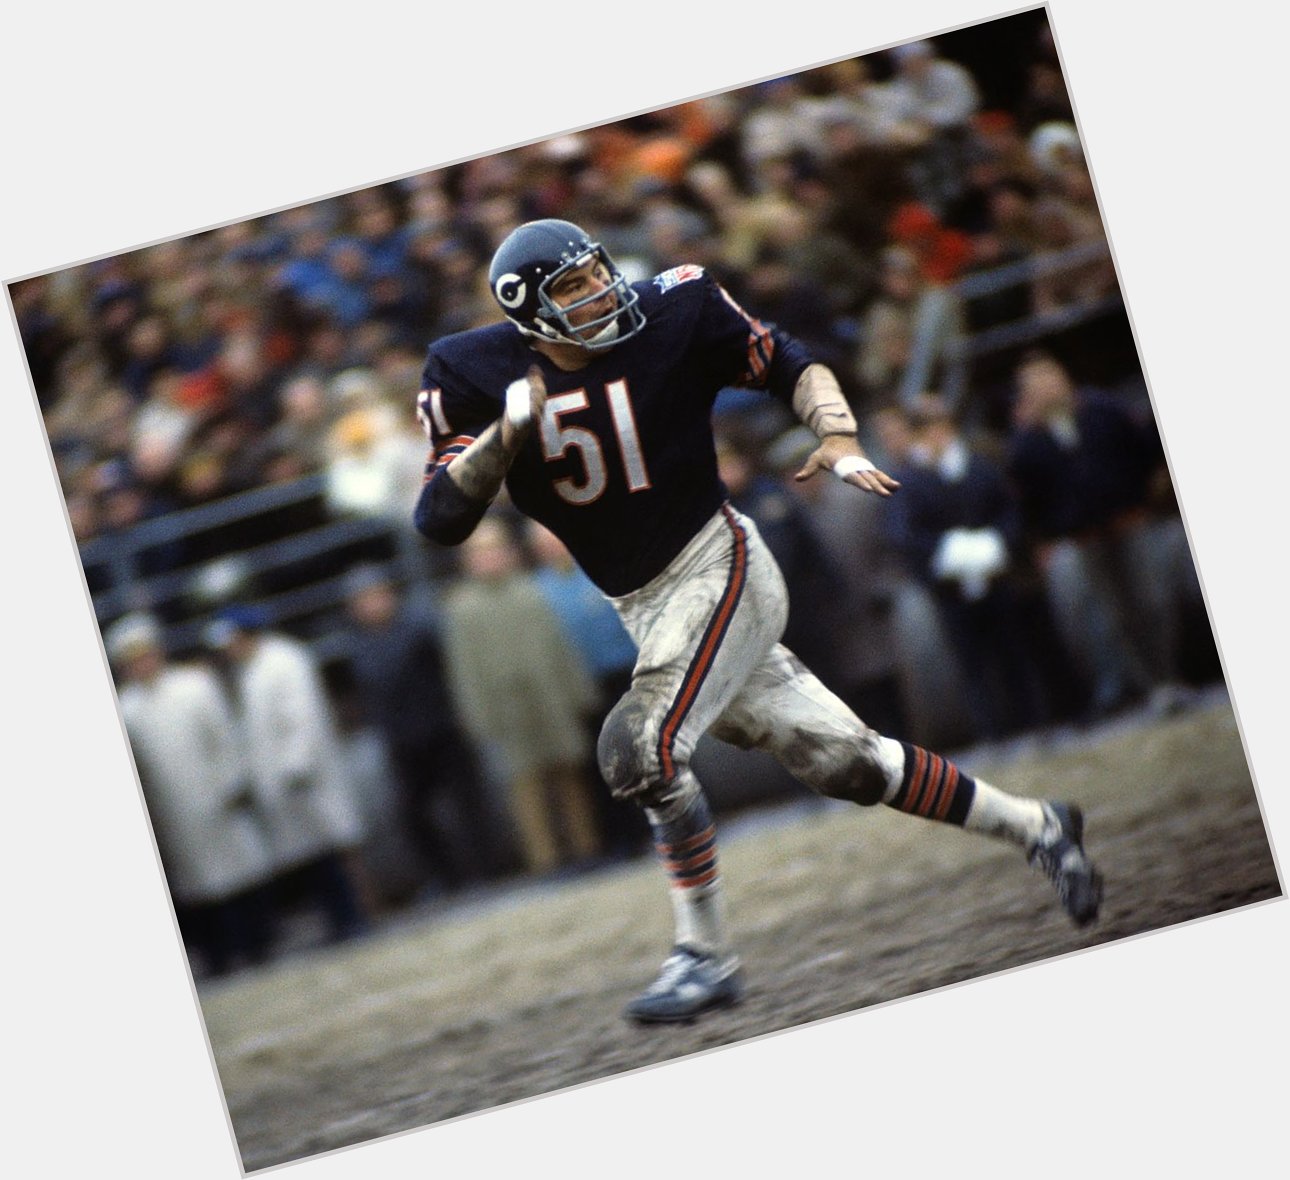 Happy 76th bday to Hall of Famer Dick Butkus! Dude was a beast! 